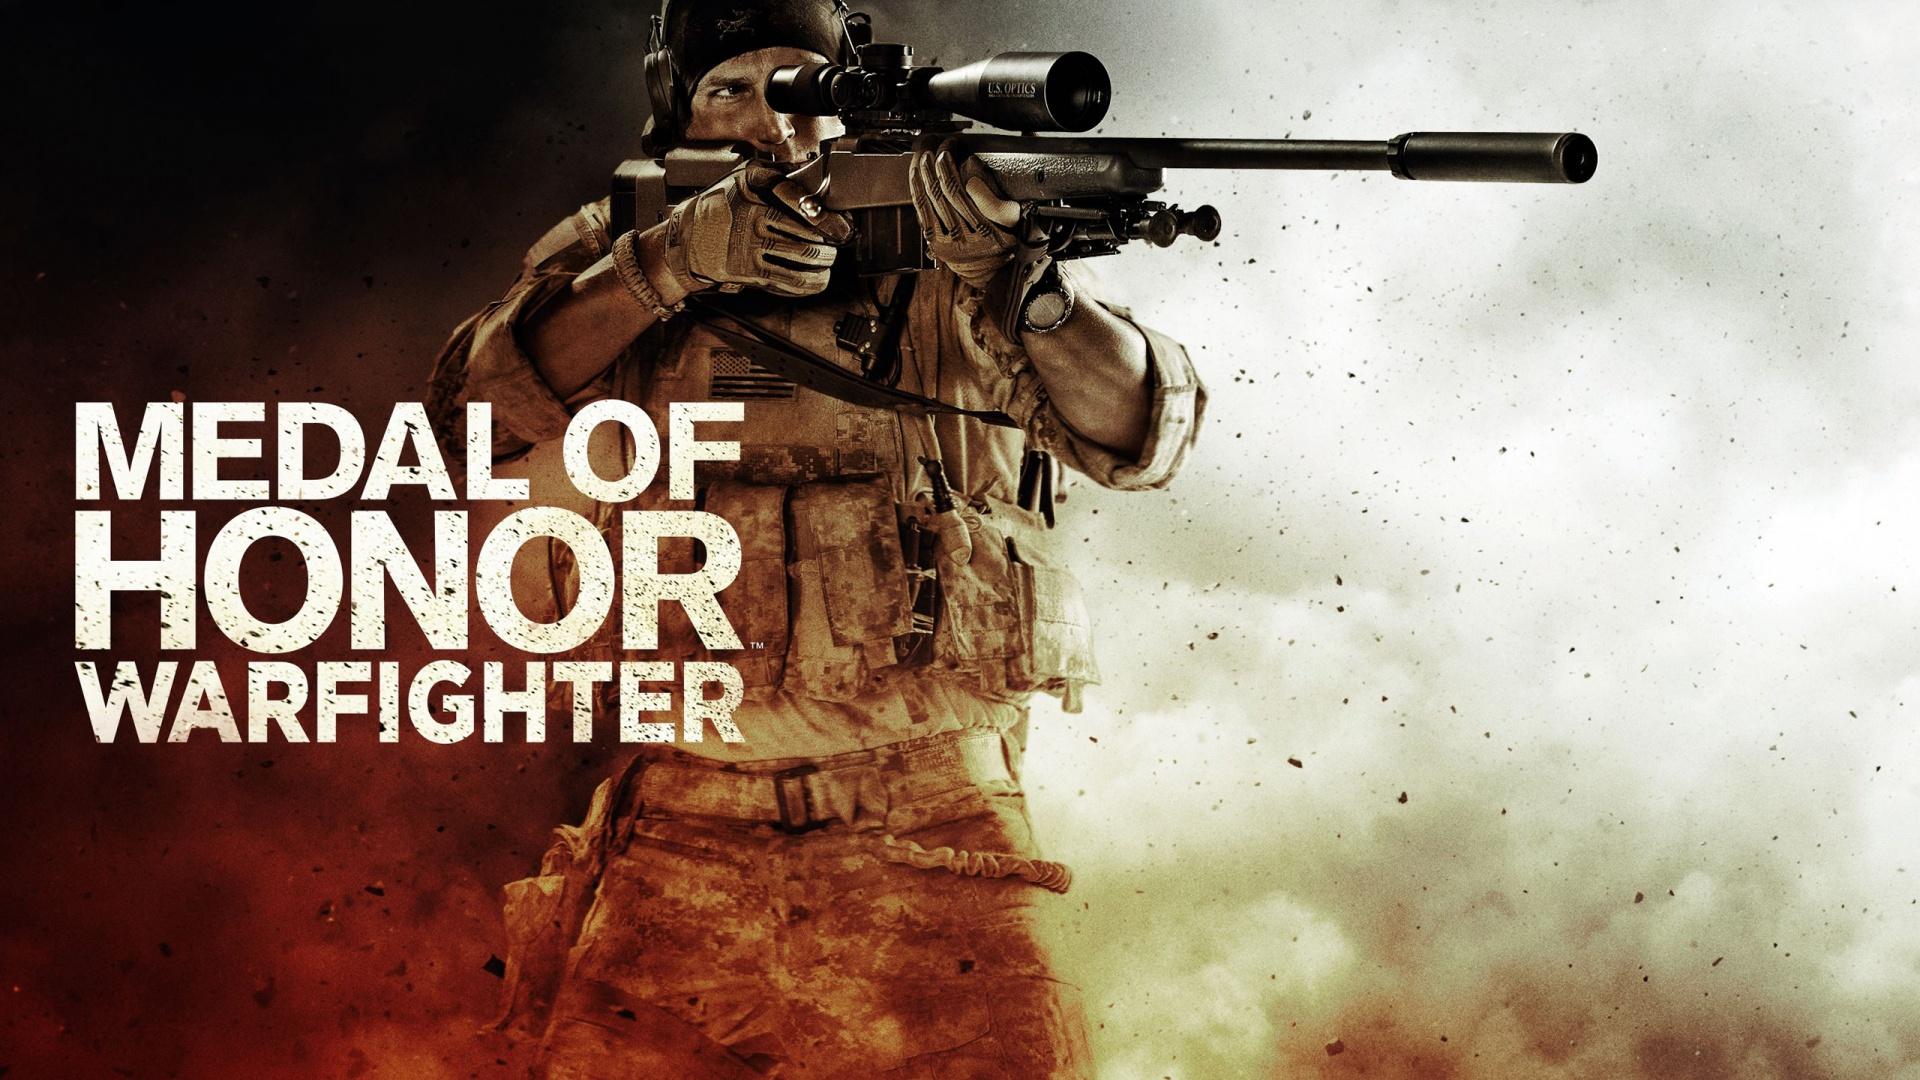 Medal of Honor 2 Game Wallpaper in jpg format for free download